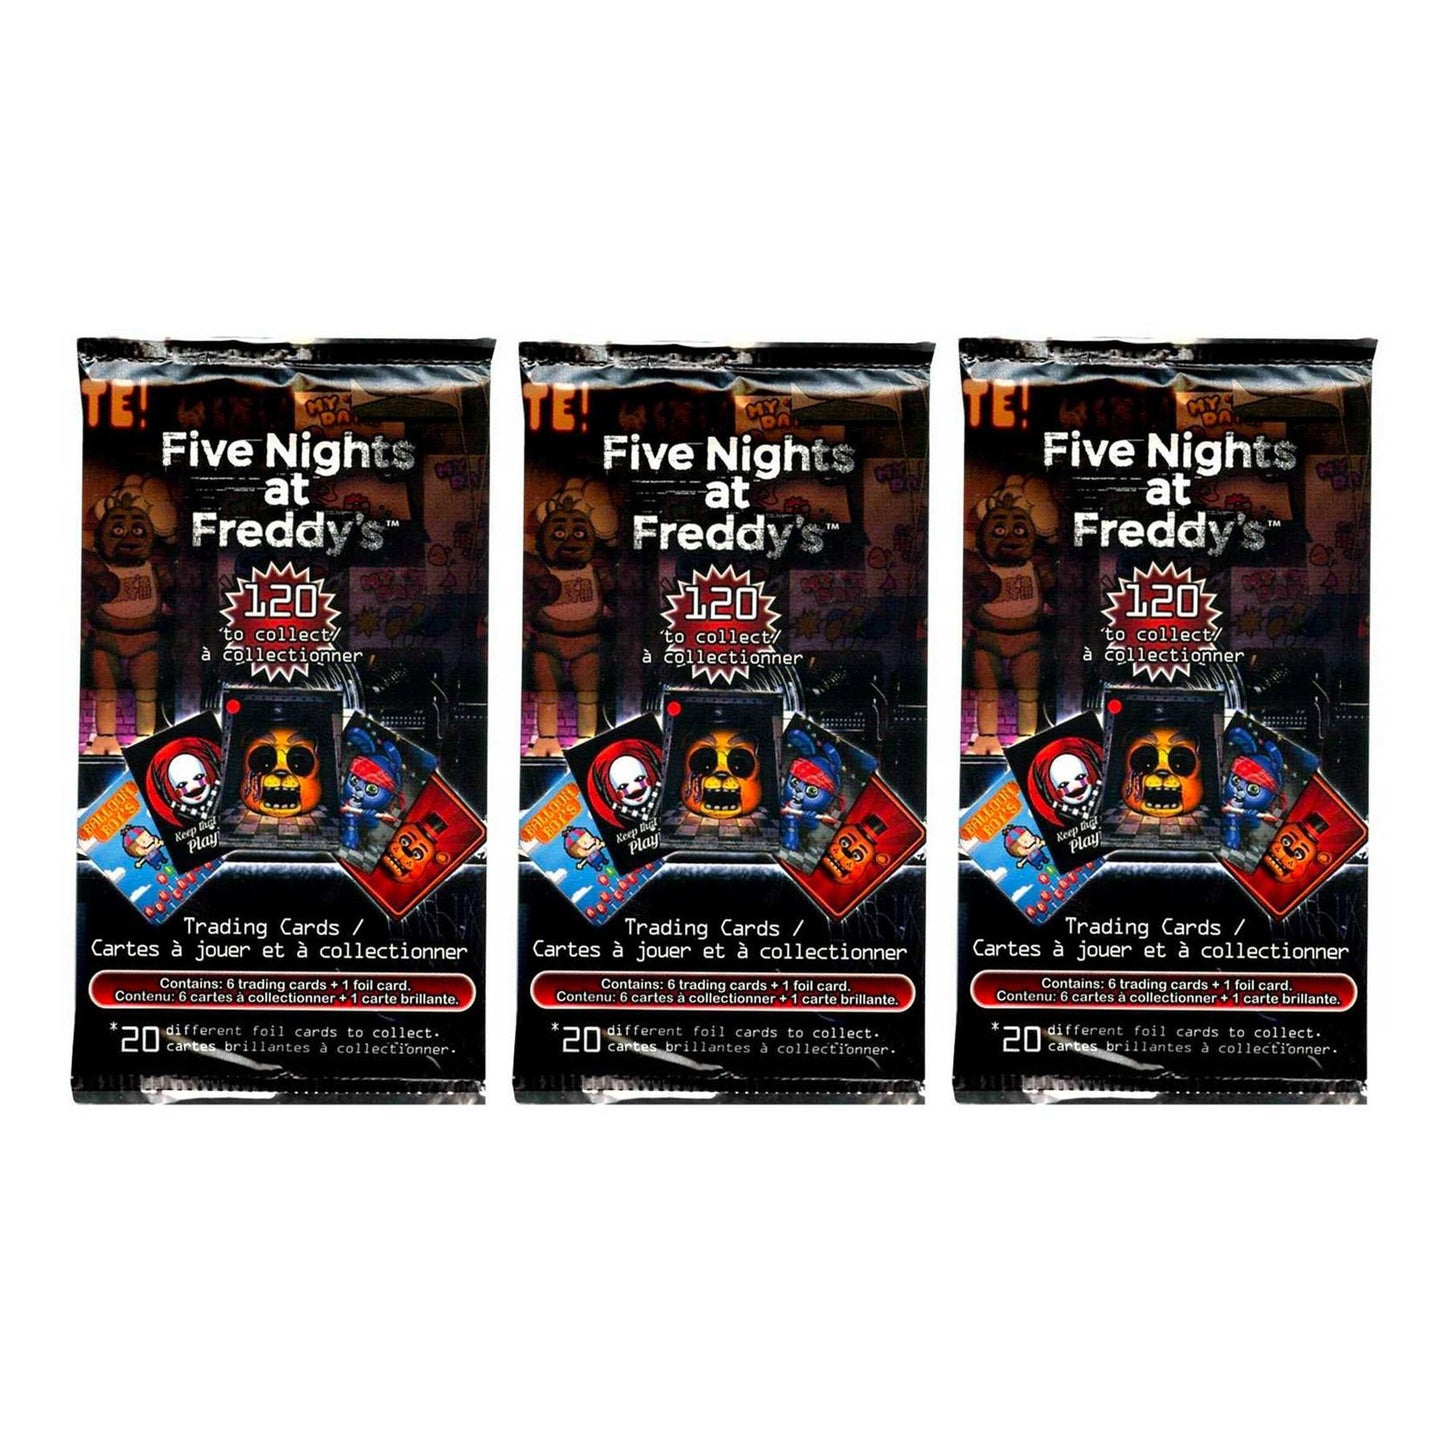 Five Nights At Freddy's FNAF Trading Card Pack 6 Cards & 1 Foil